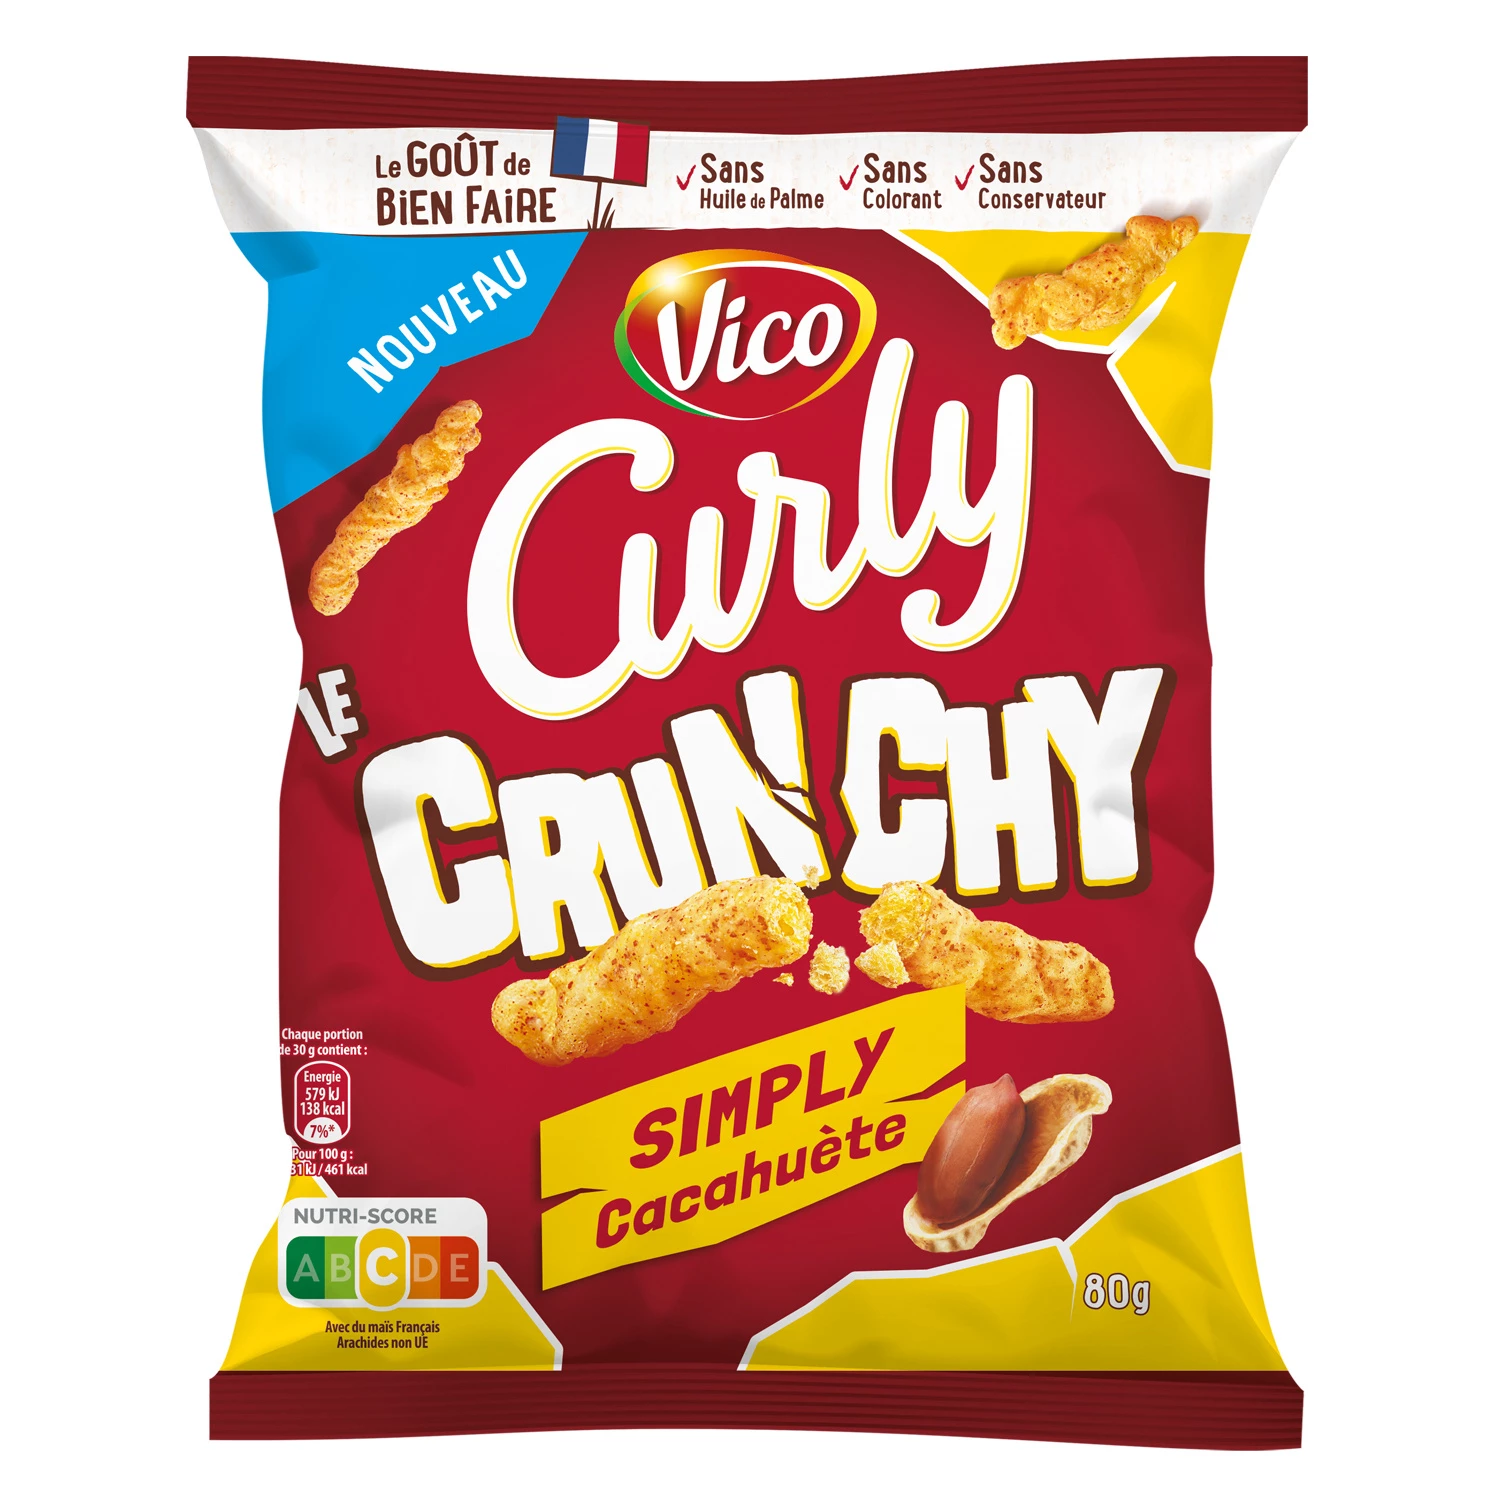 Crunchy Puffed Peanut Biscuits, 80g - VICO